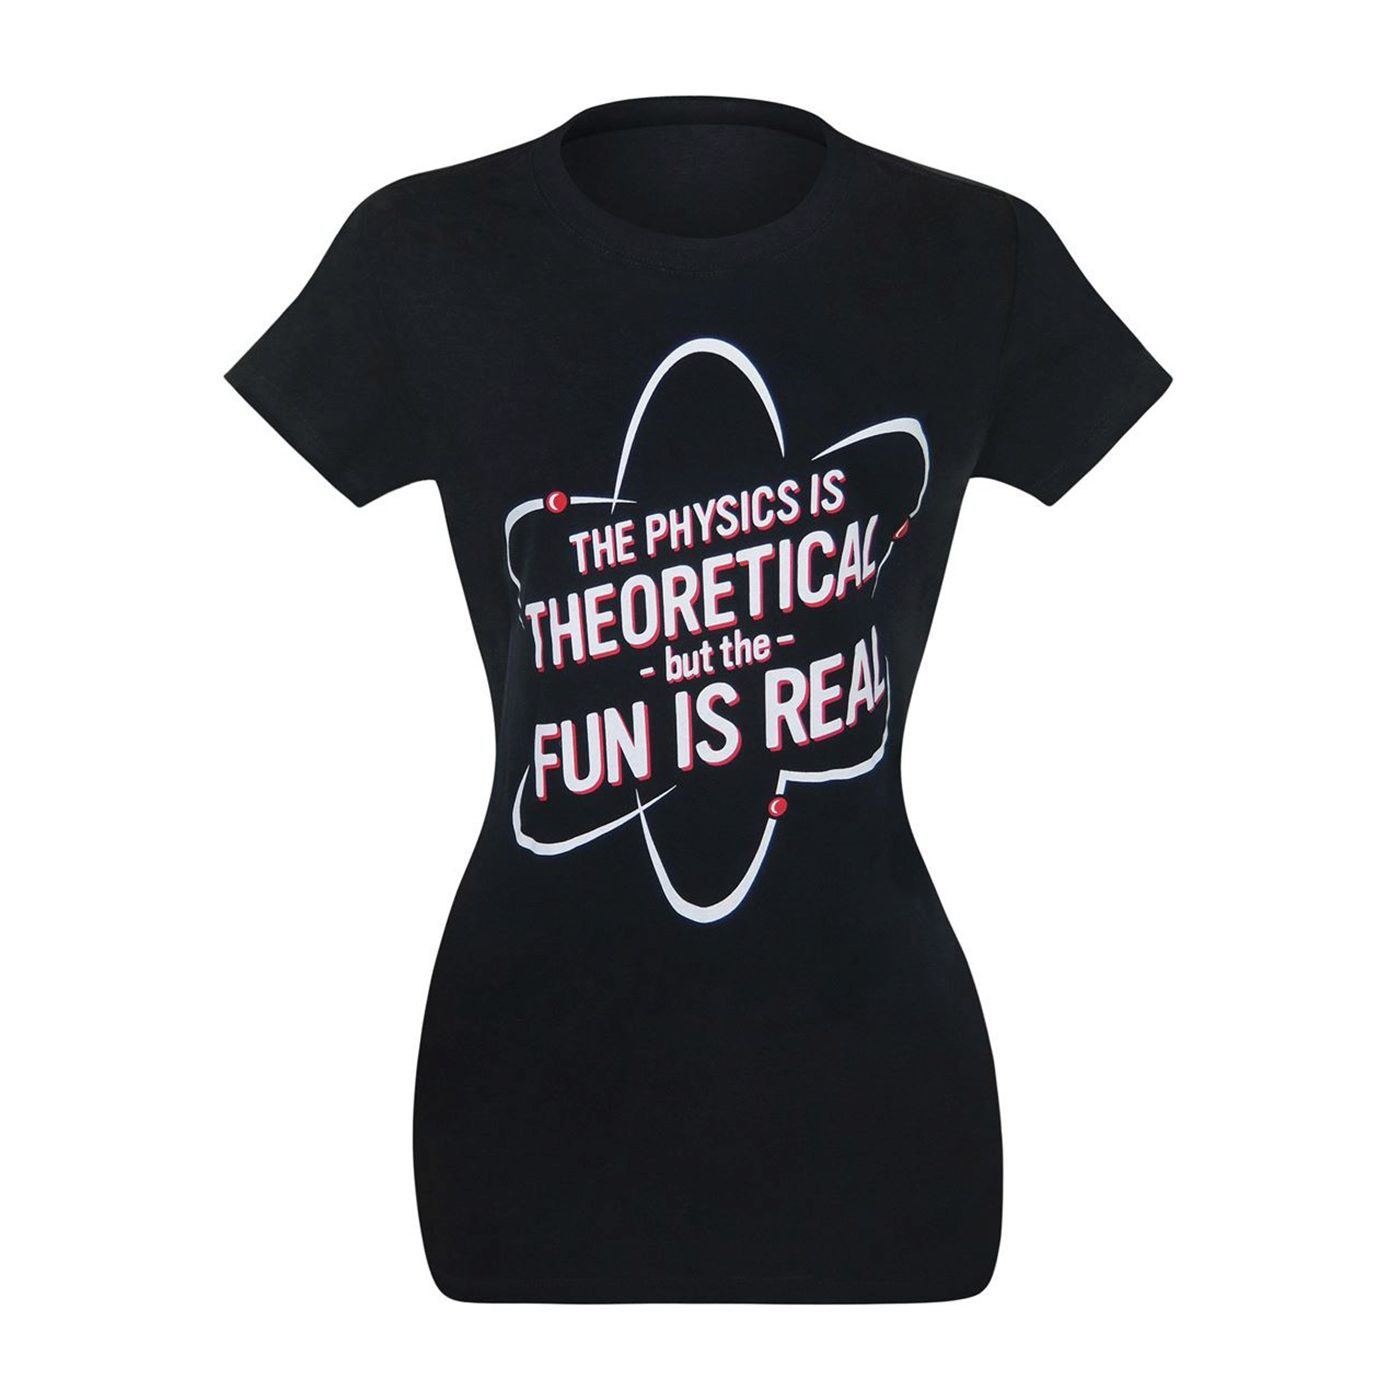 The Physics is Real Women's T-Shirt